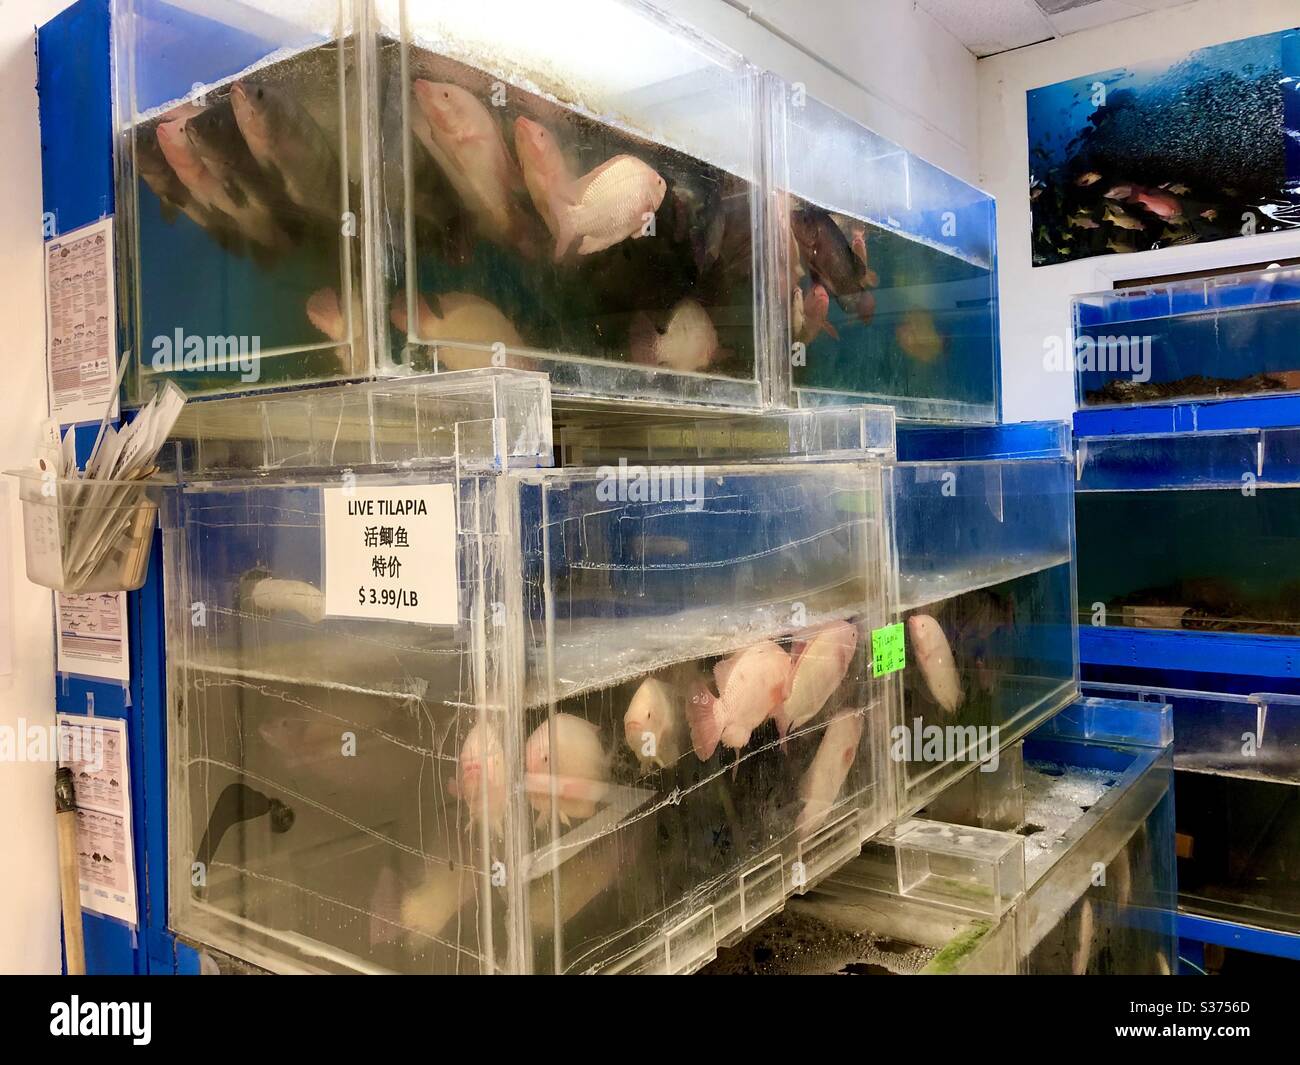 Fish tanks with live tilapia and various seafood for sale in an international market. Stock Photo